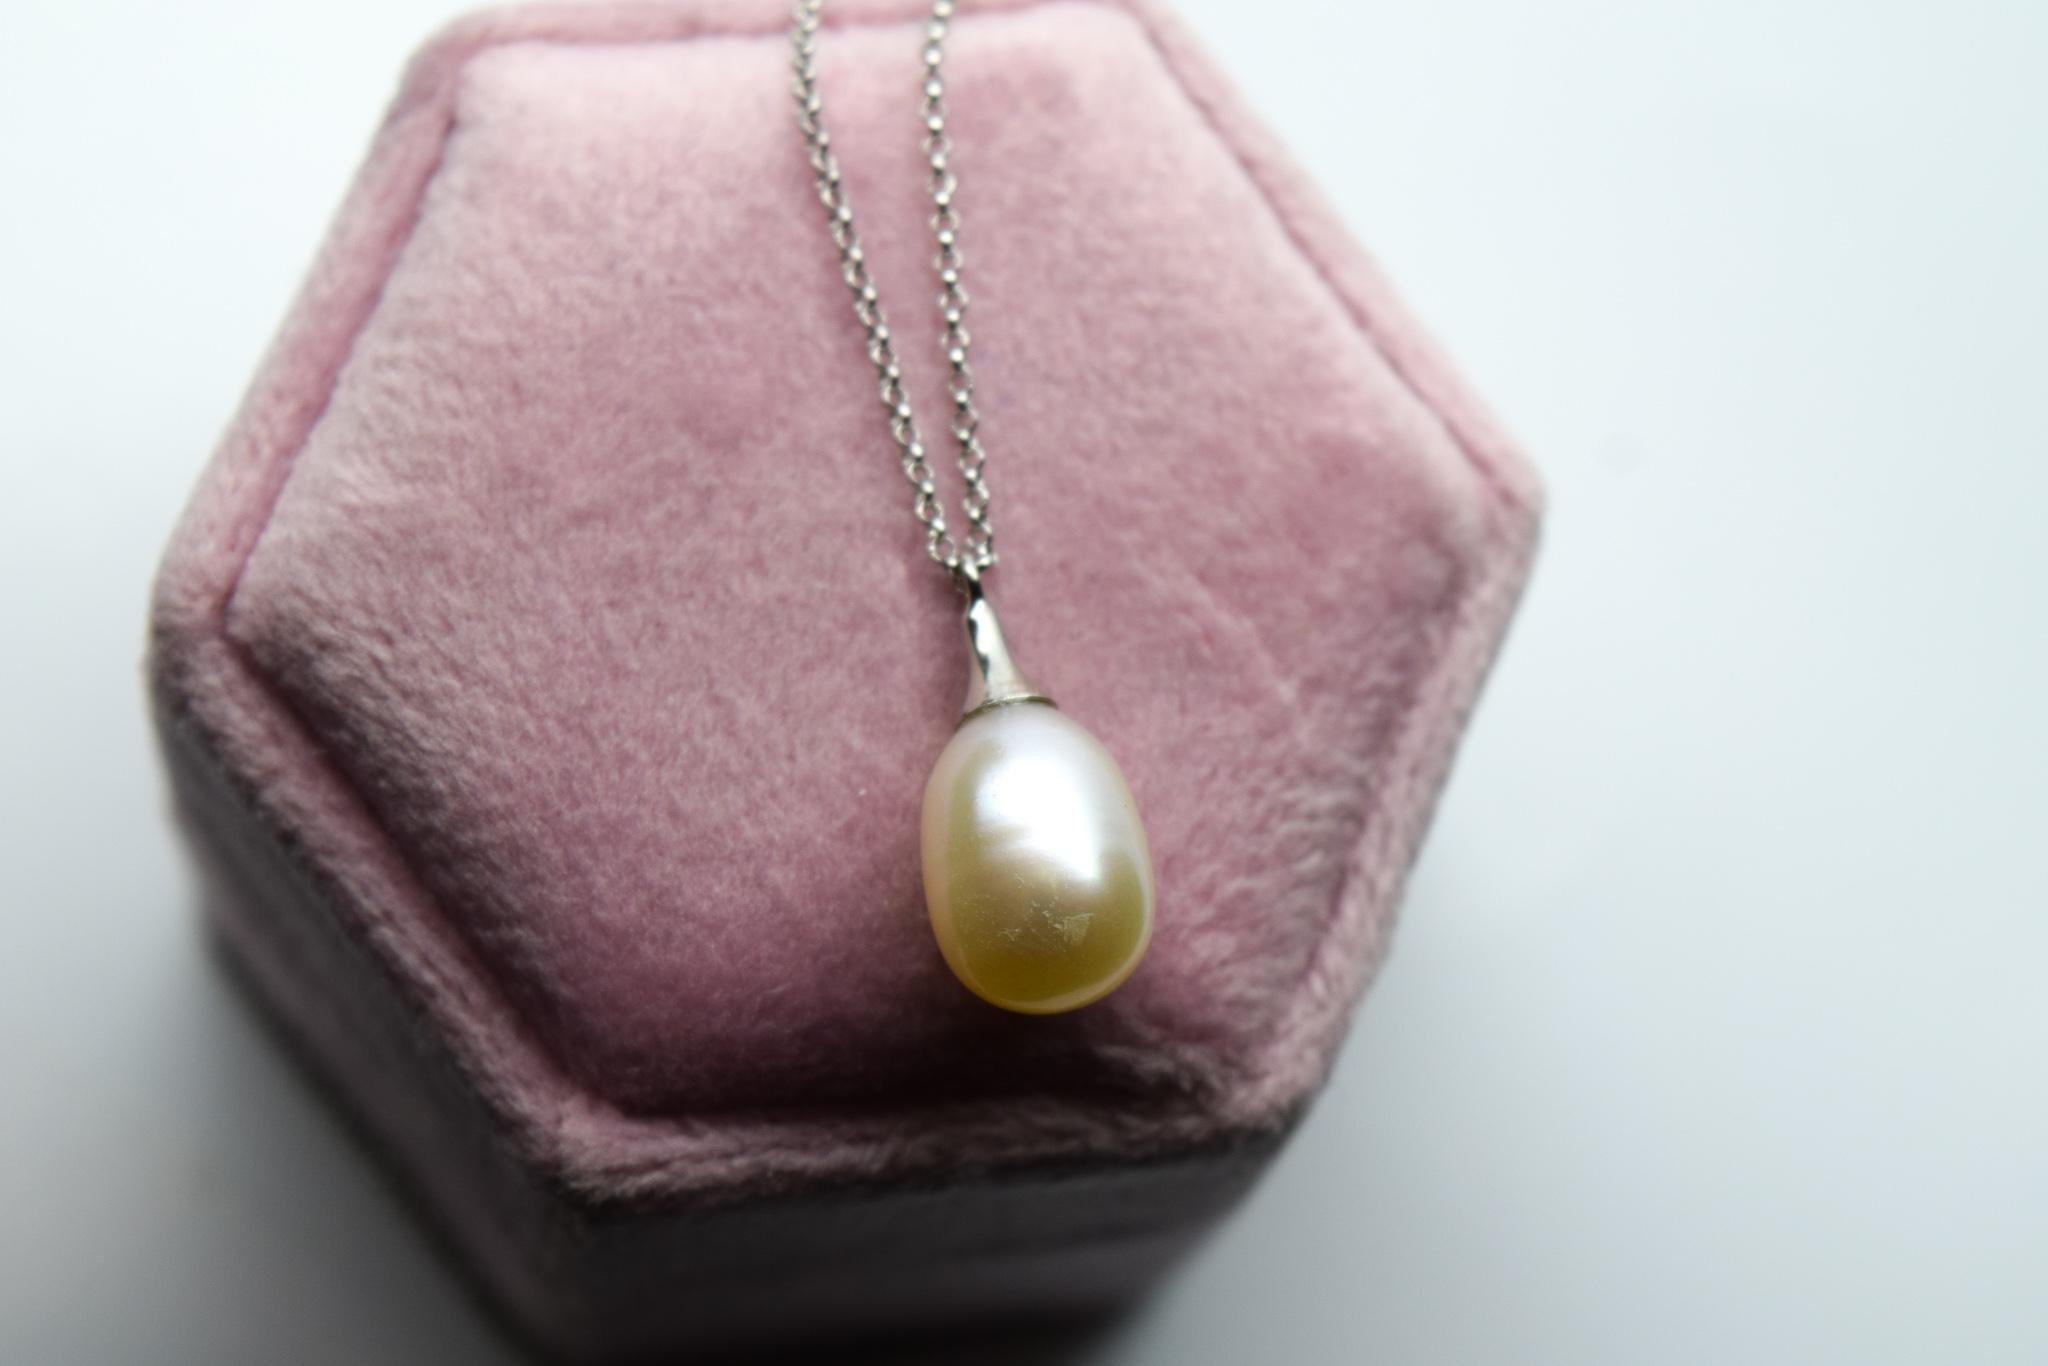 Pearl pendant necklace 14KT yellow gold For Sale 2